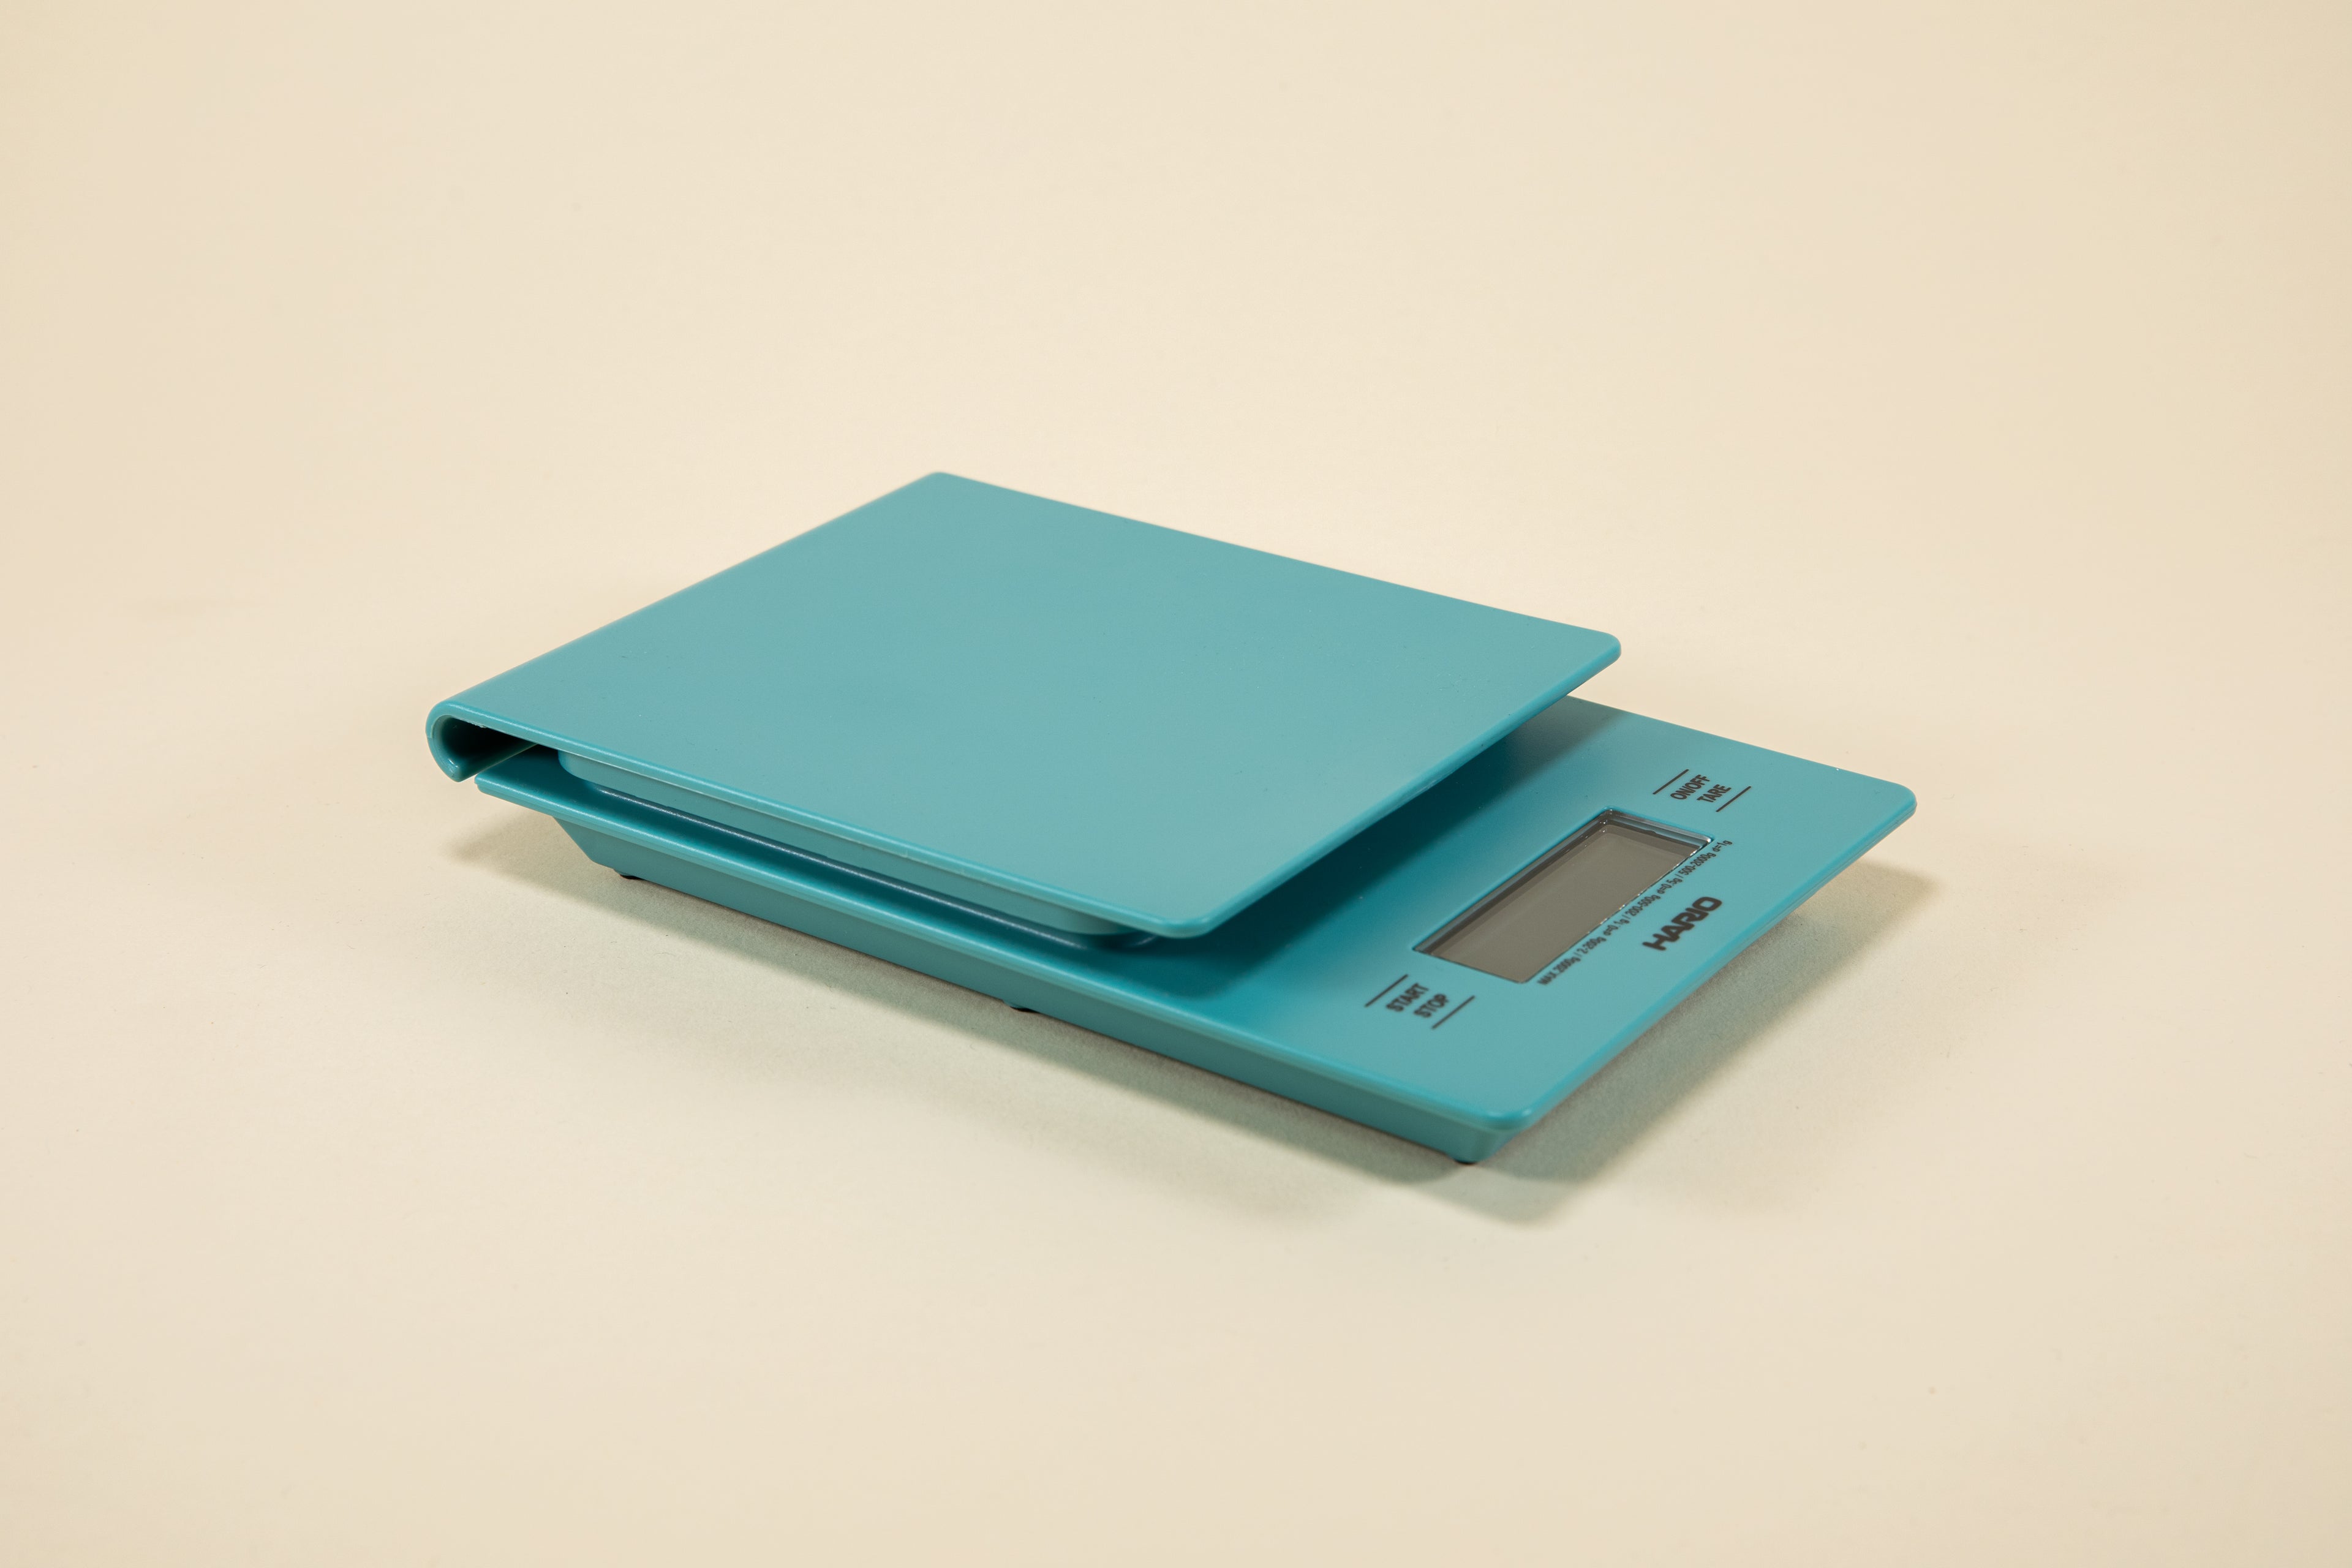 Turquoise plastic rectangular shaped scale with digital screen and set against a light background.